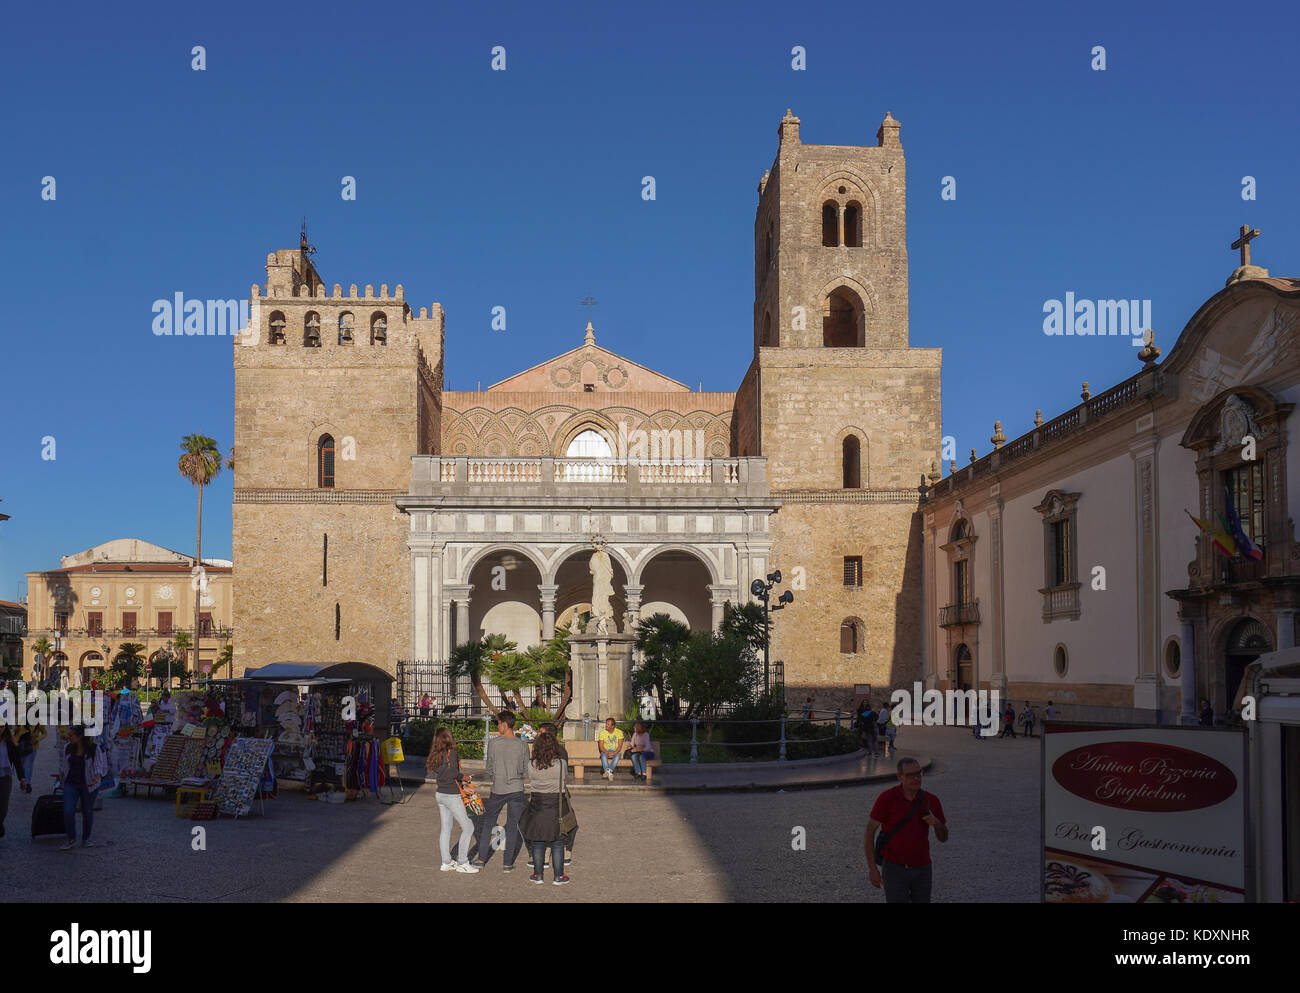 The cathedral in Monreale, one of the greatest examples of Norman architecture. From a series of travel photos in Sicily, Italy. Photo date: Thursday, Stock Photo